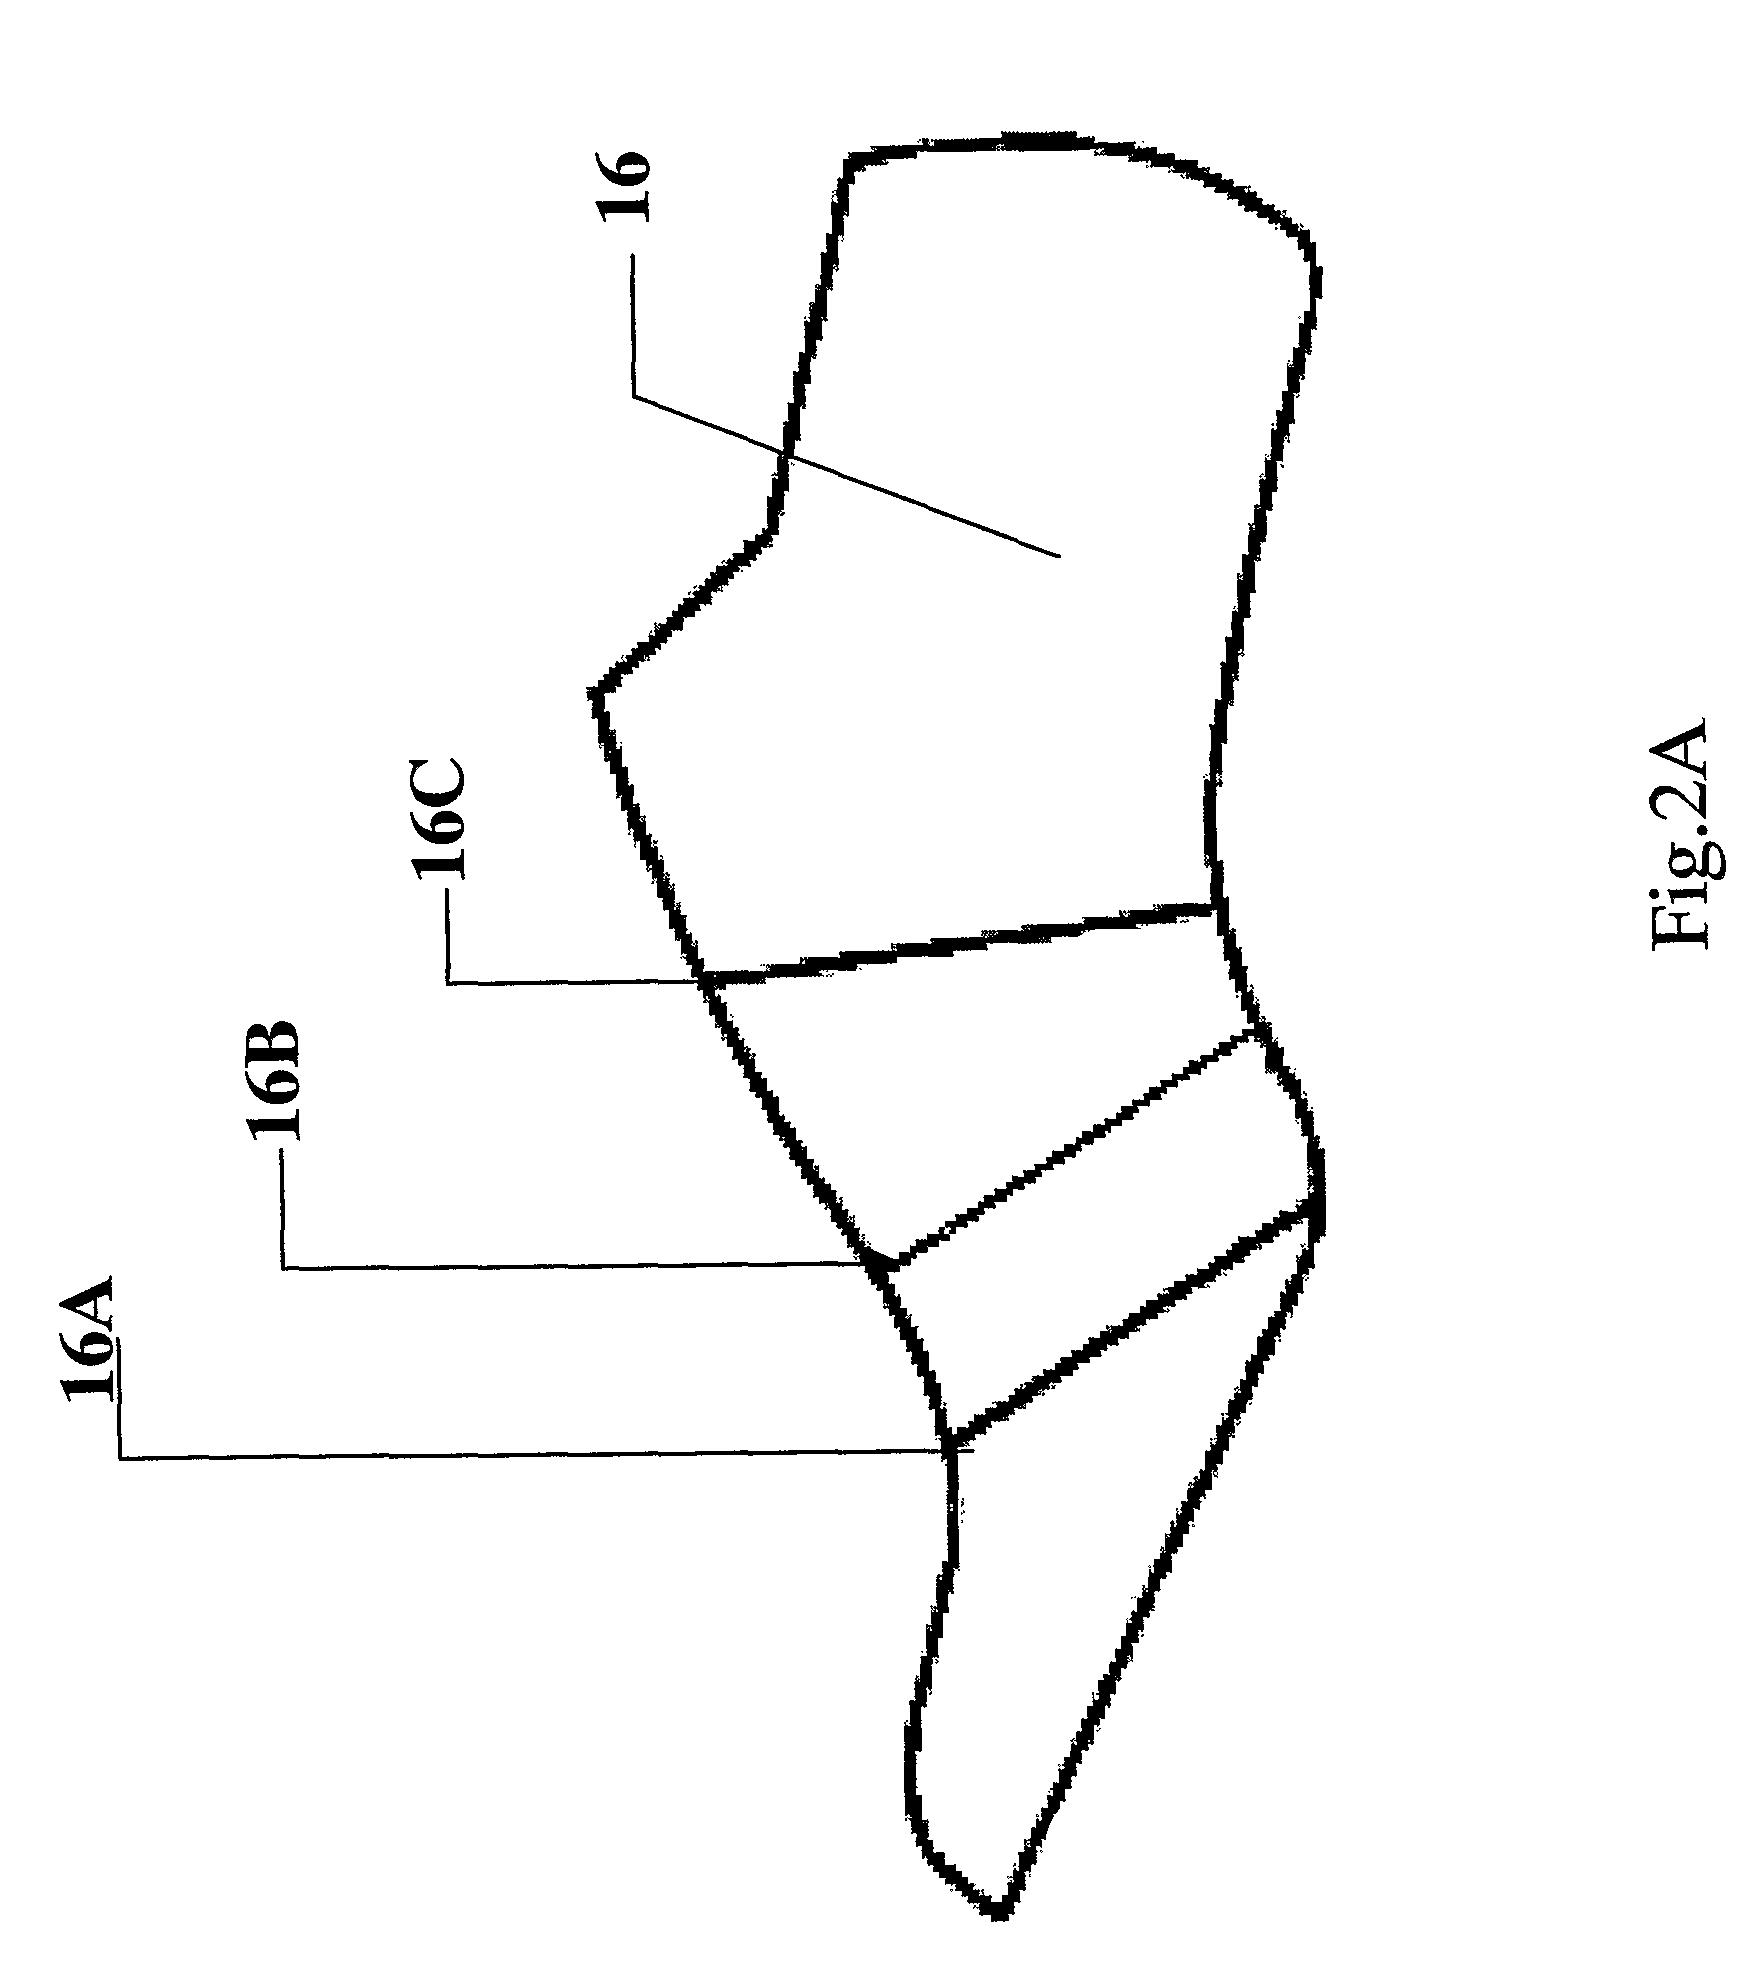 Method and system for customized shoe fitting based on common shoe last using foot outline comparison and interchangeable insole adaptors